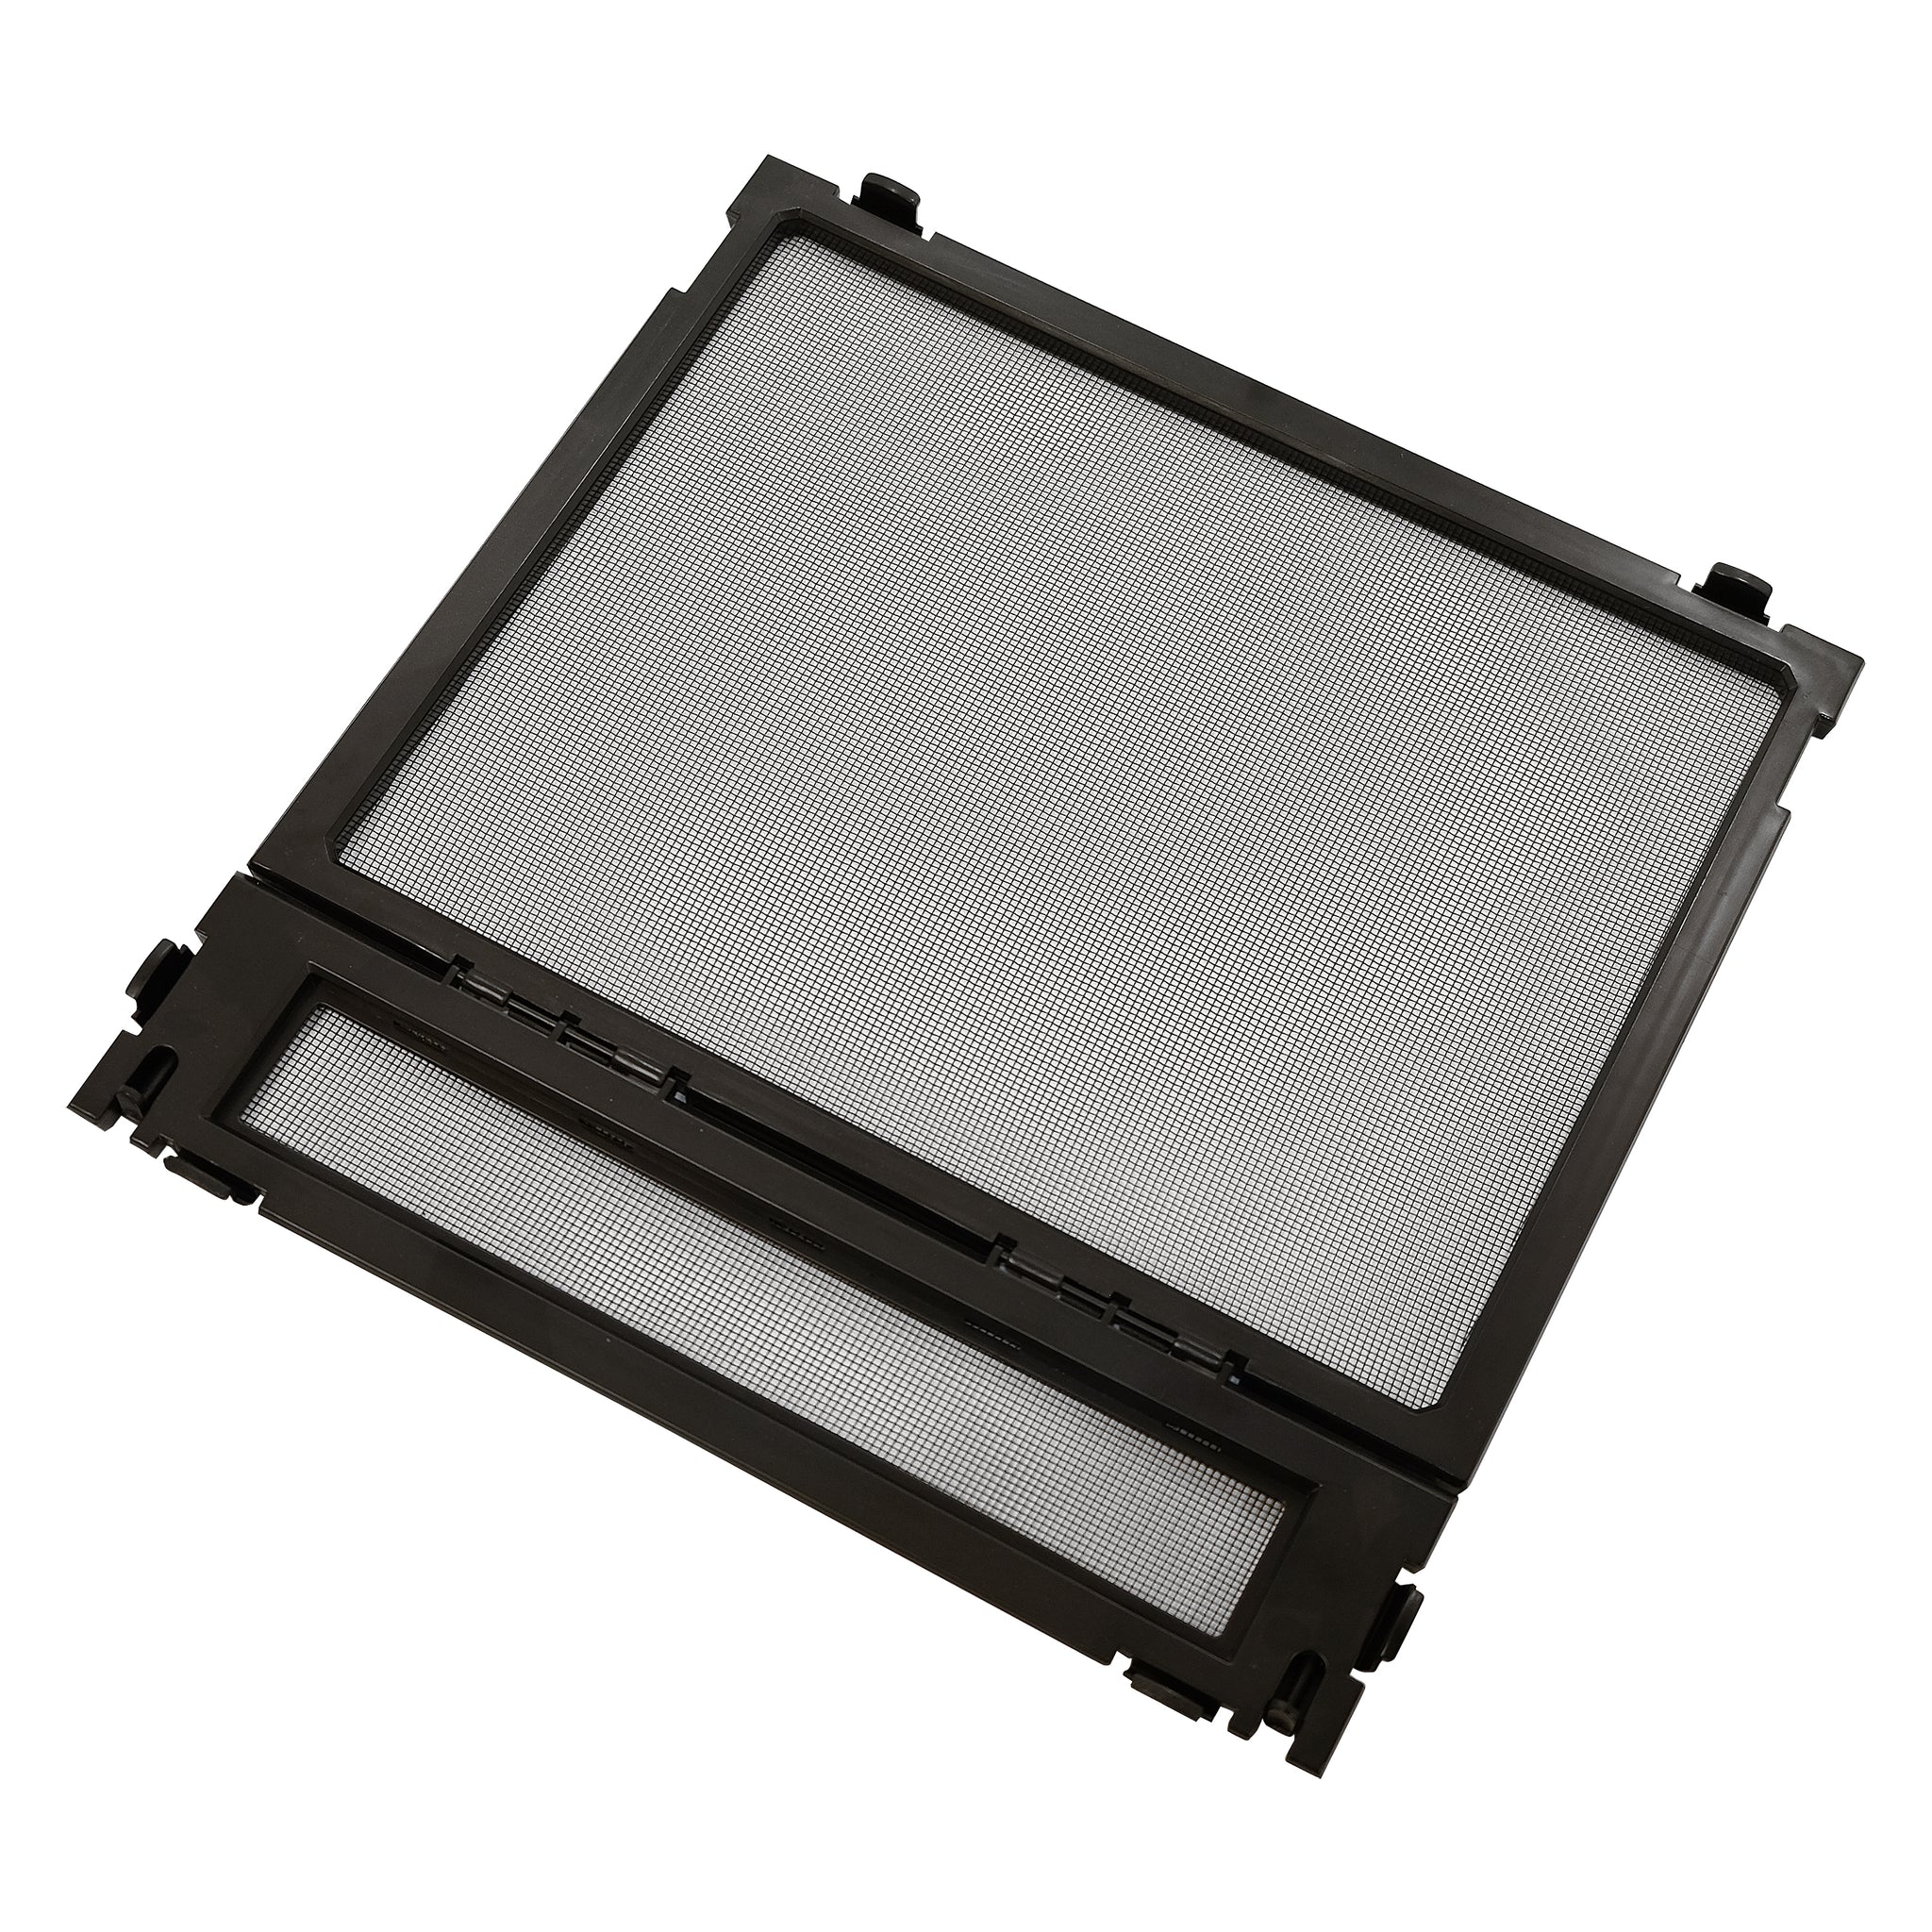 ZILLA 12" x 12" SCREEN ASSEMBLY WITH HINGE